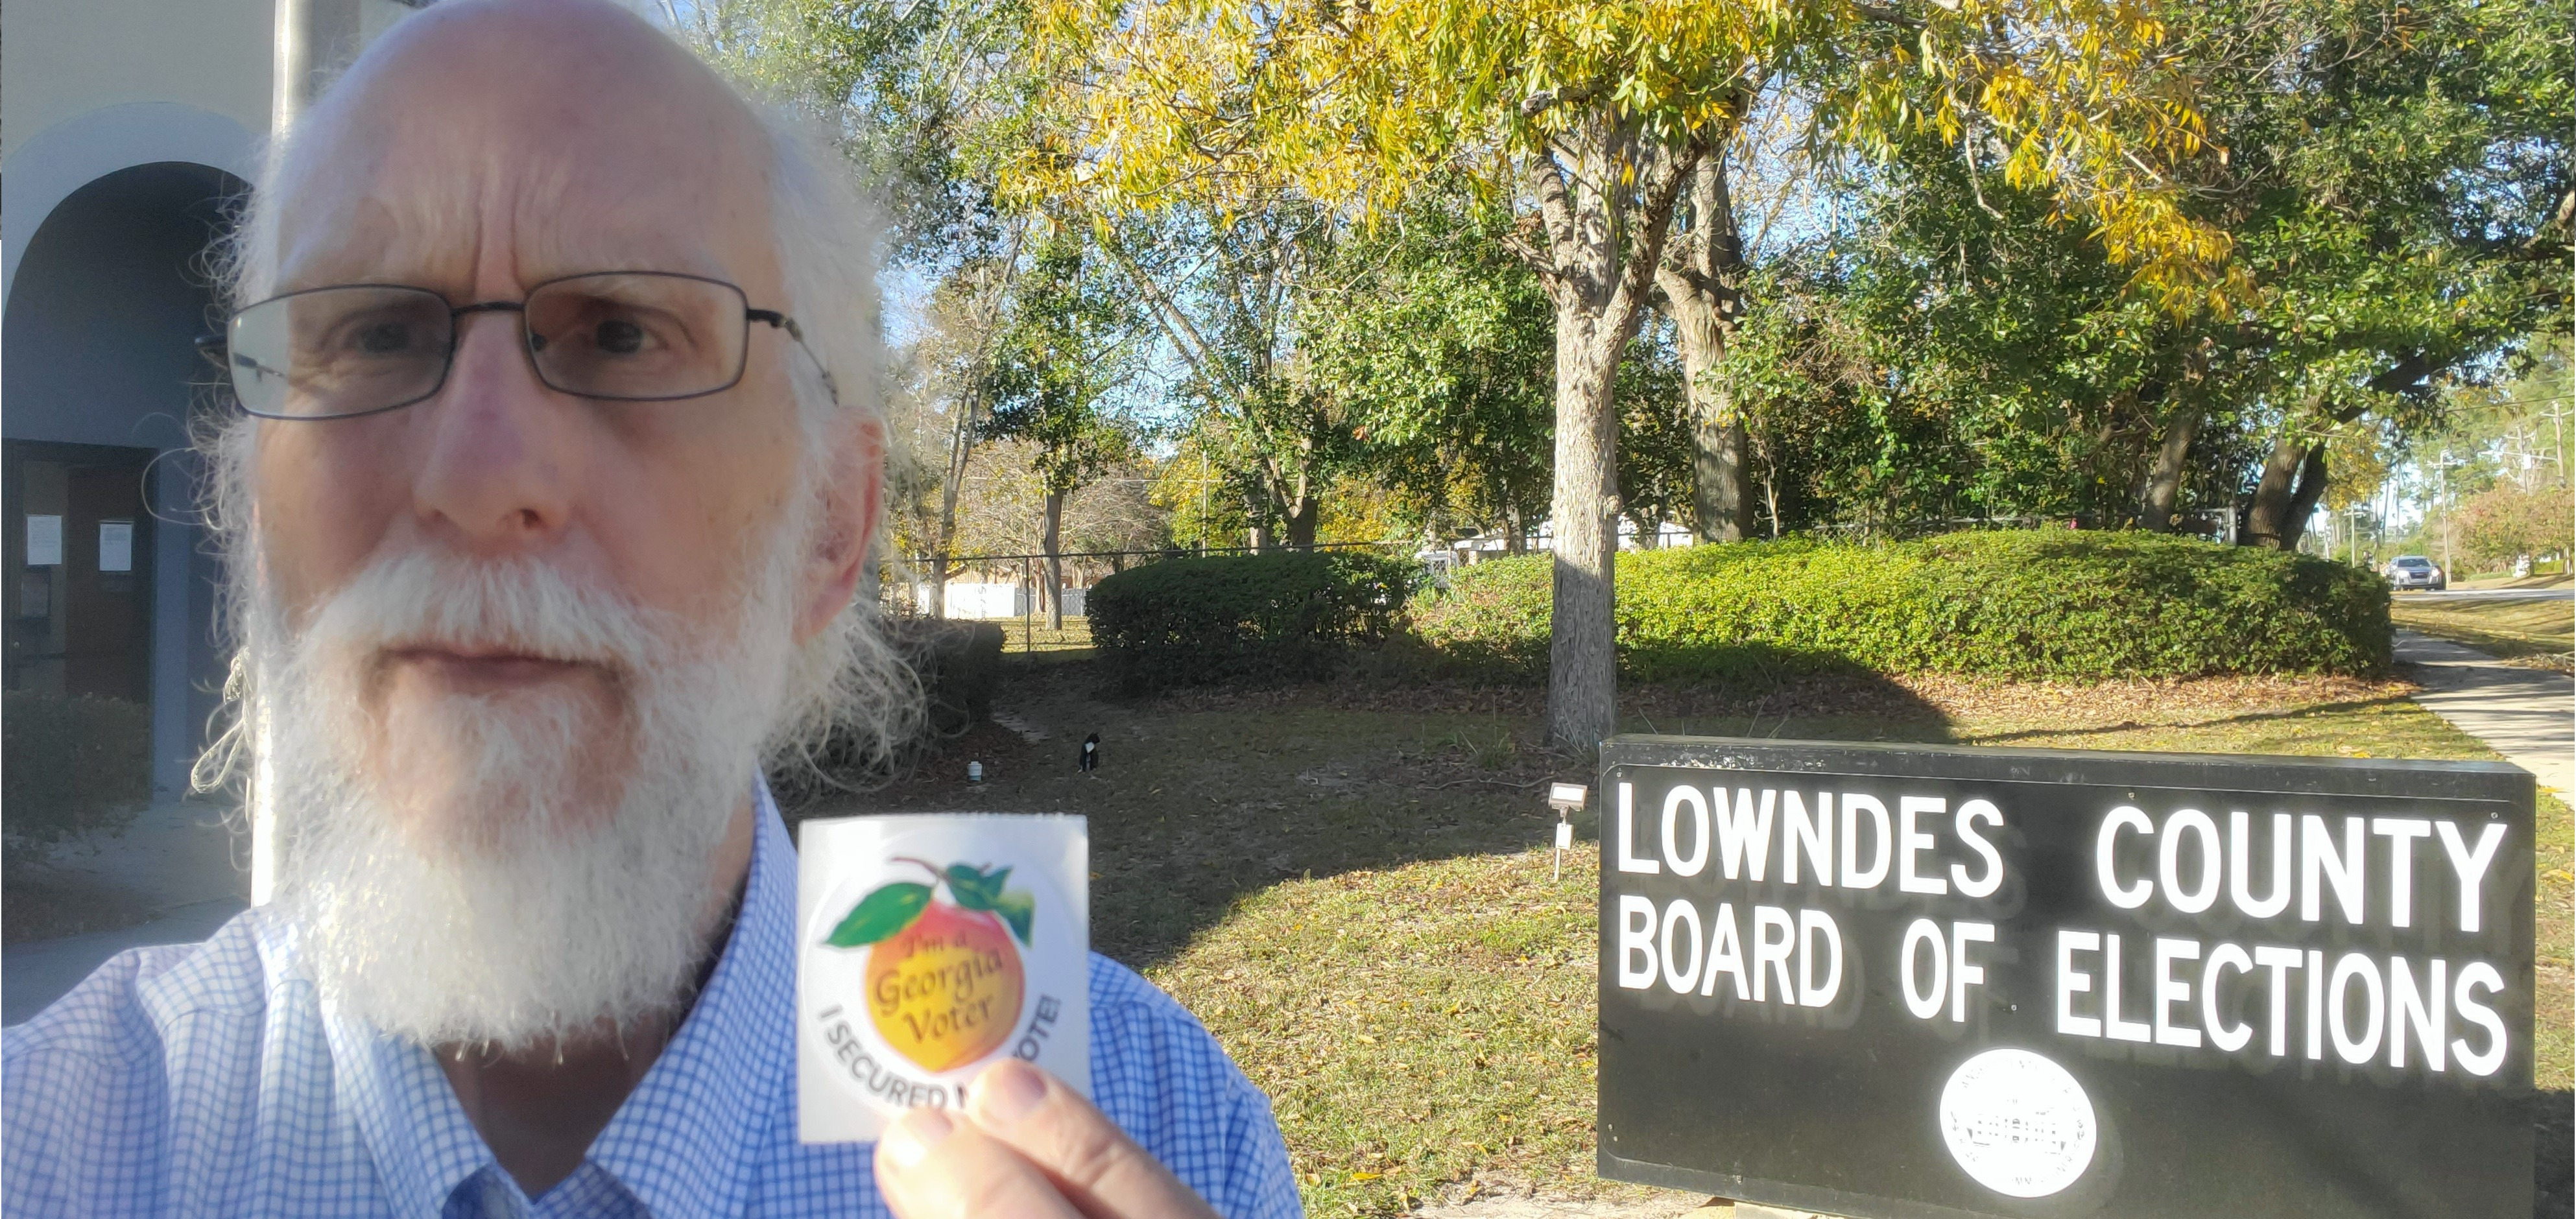 Voted, Lowndes County Board of Elections